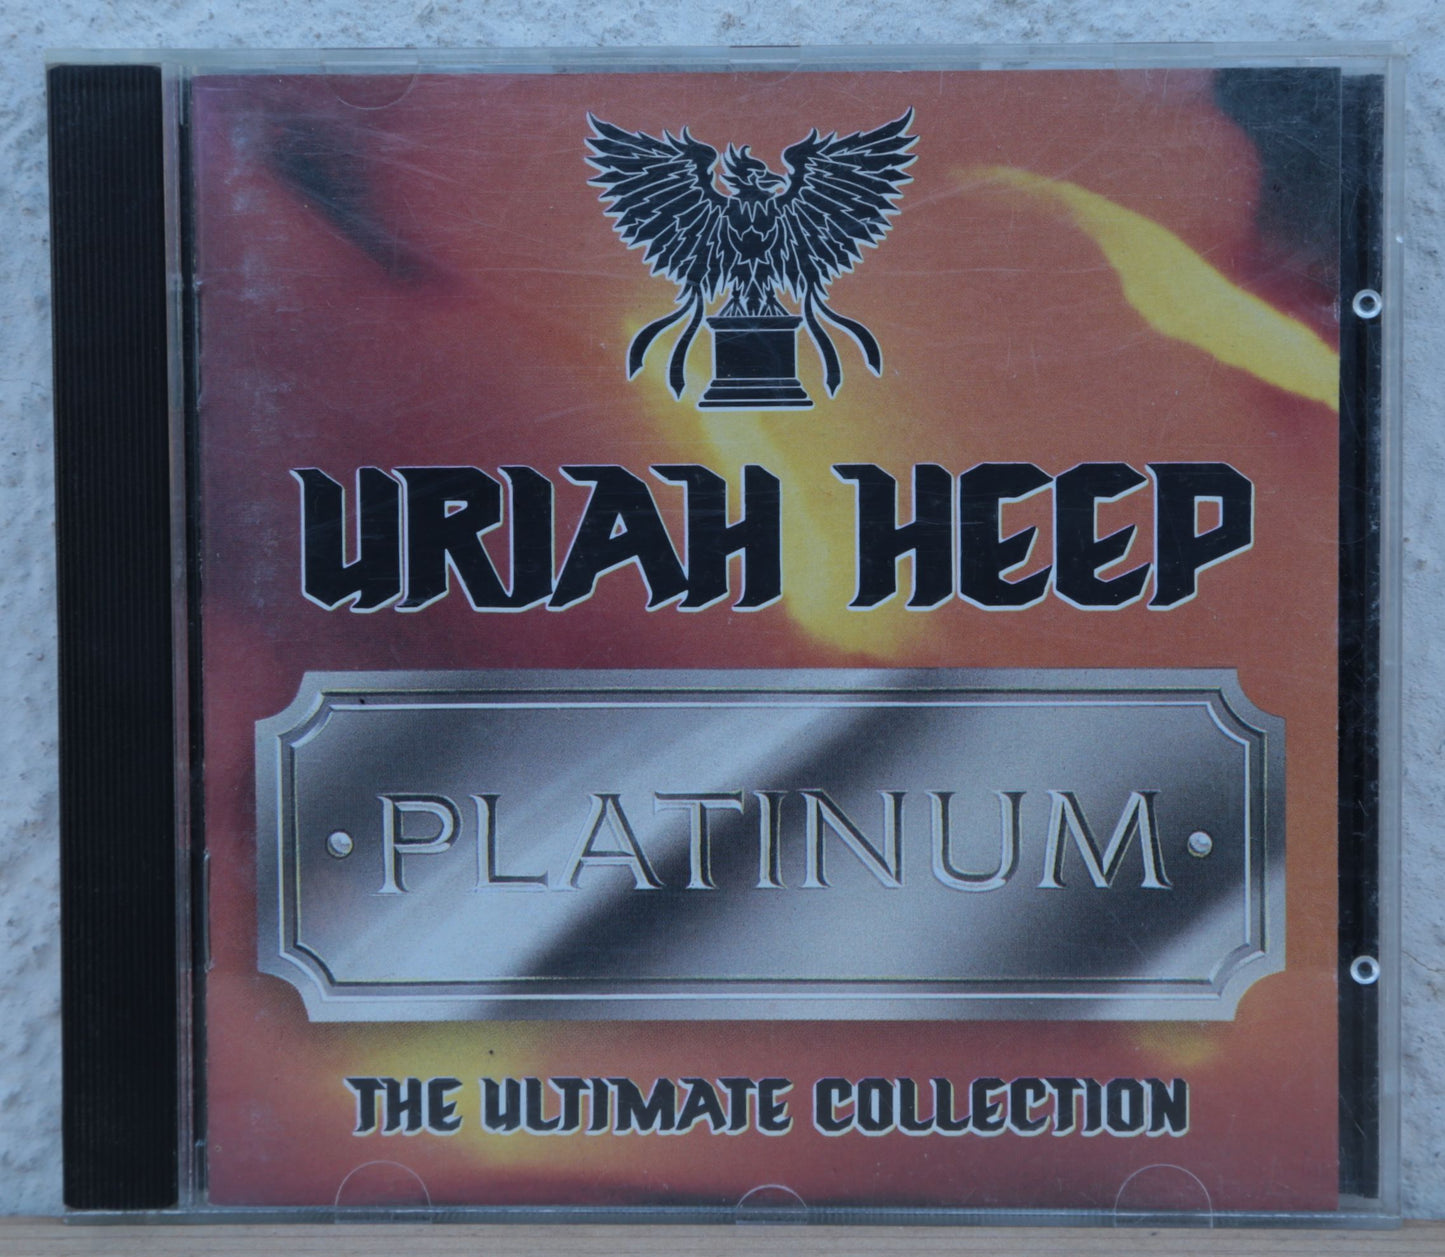 Uriah Heep - Platinum (the ultimate collection) cd